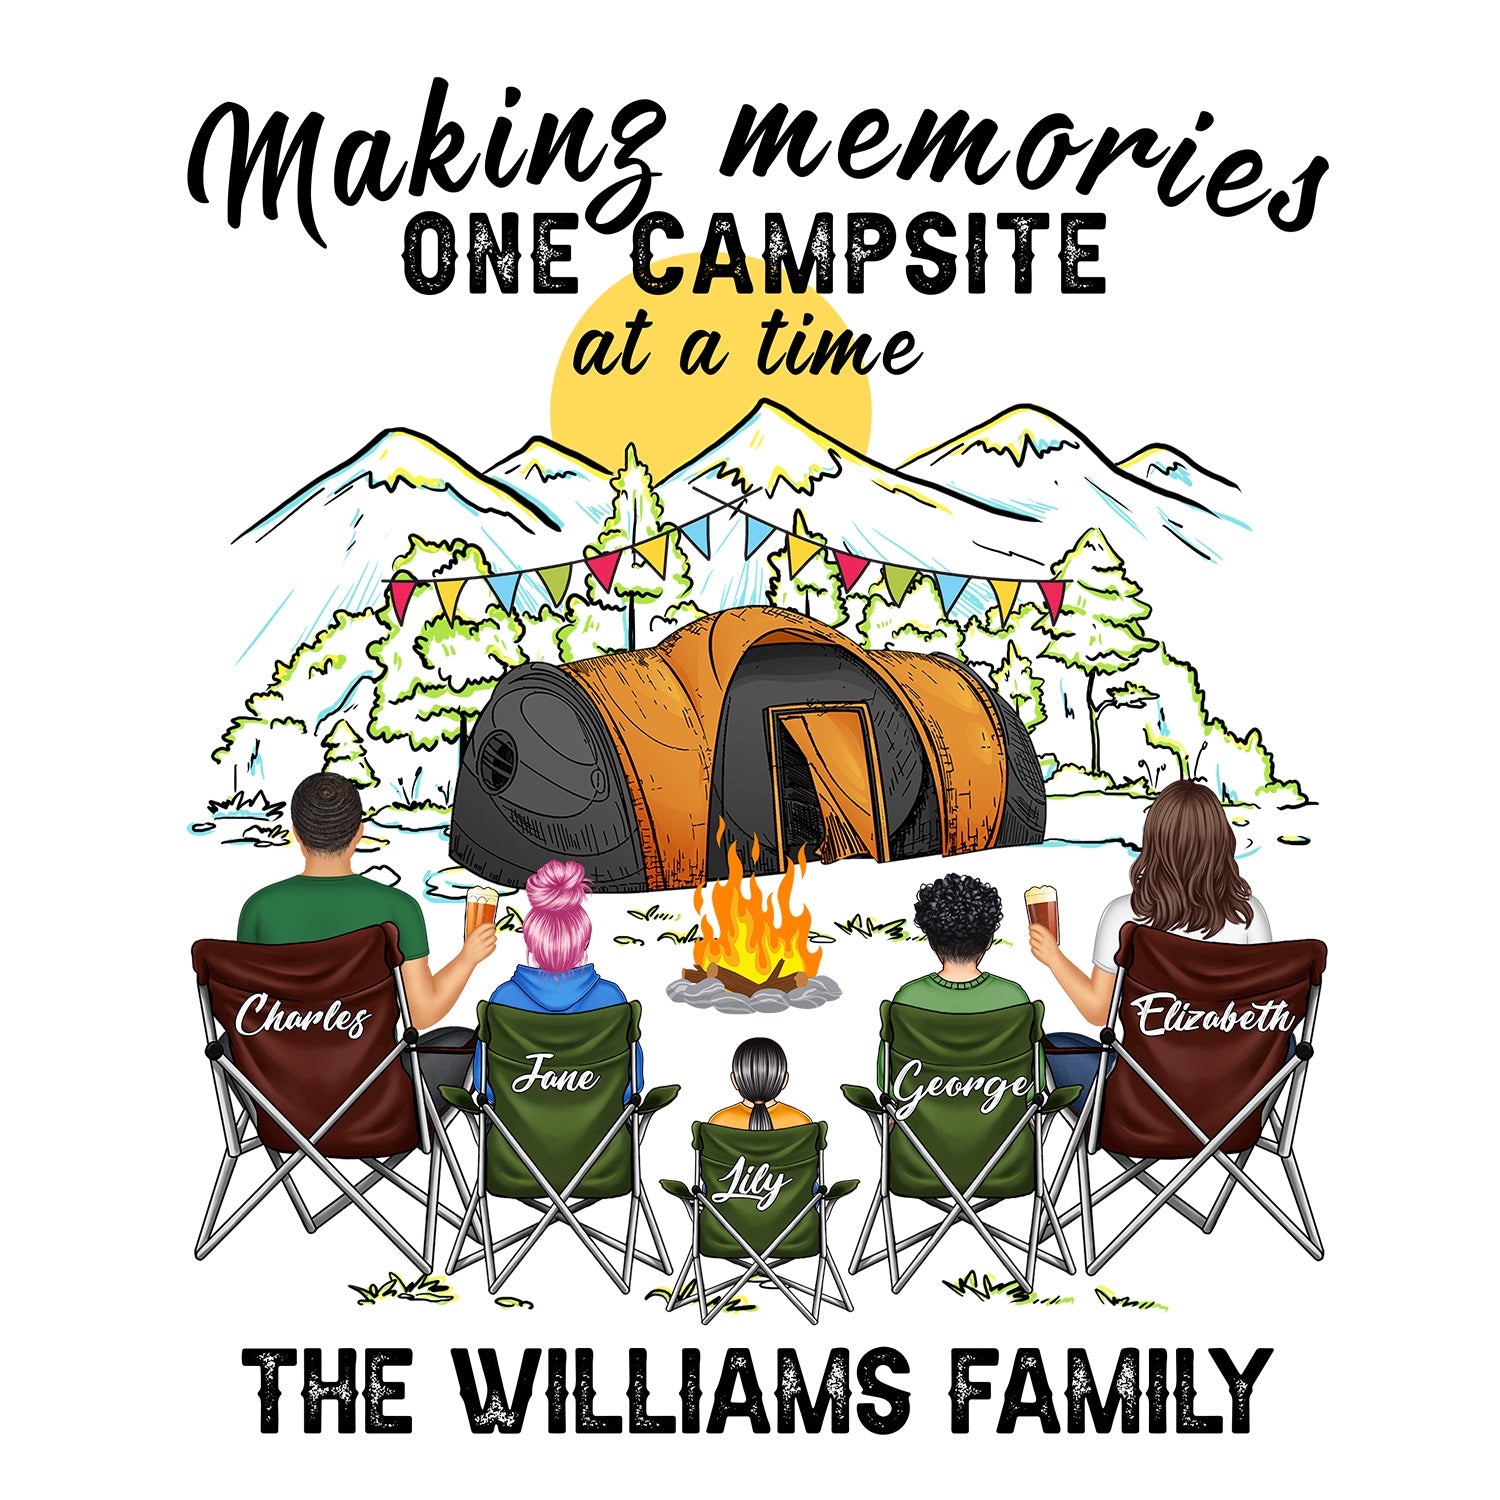 Making Memories One Campsite At A Time - Gift For Camping Family - Personalized Camping Decal, Decor Decal